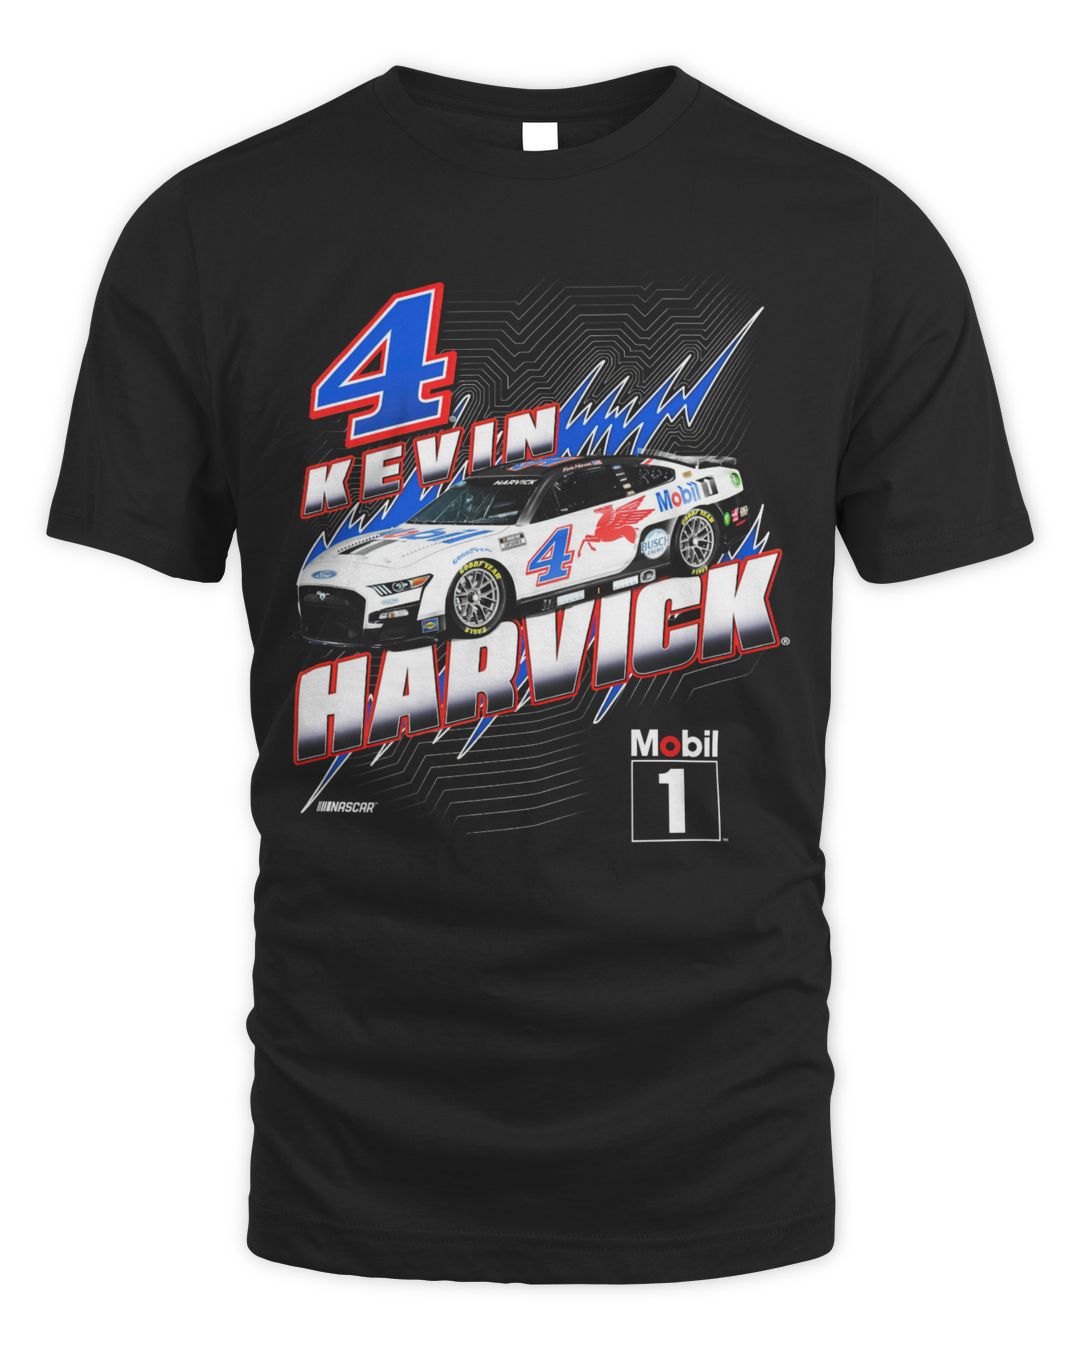 Kevin Harvick Stewart-Haas Racing Team Collection Mobil 1 Groove Shirt